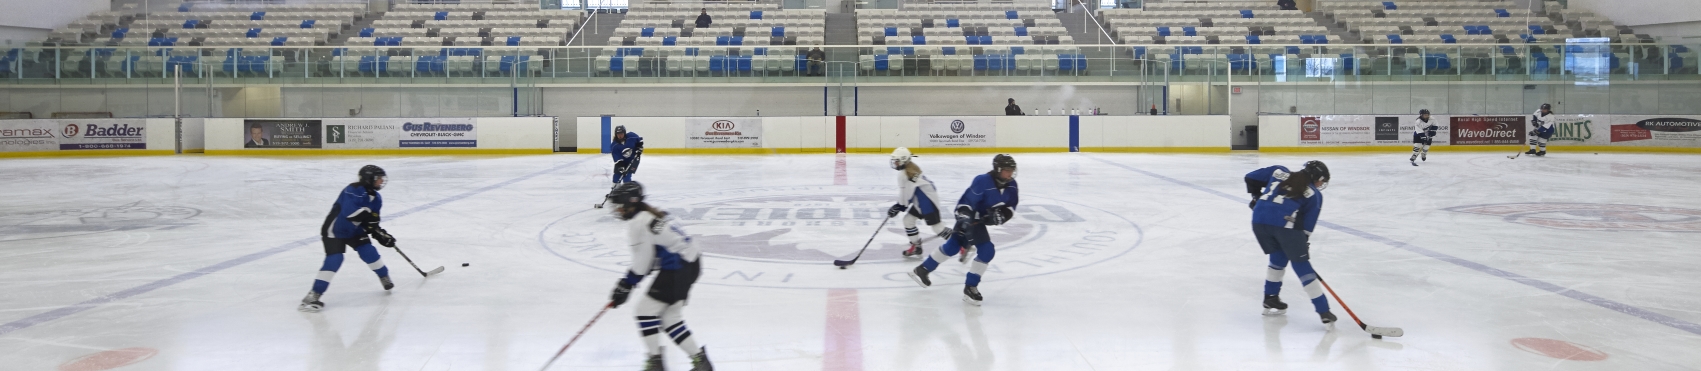 Kids playing hockey in the local arena